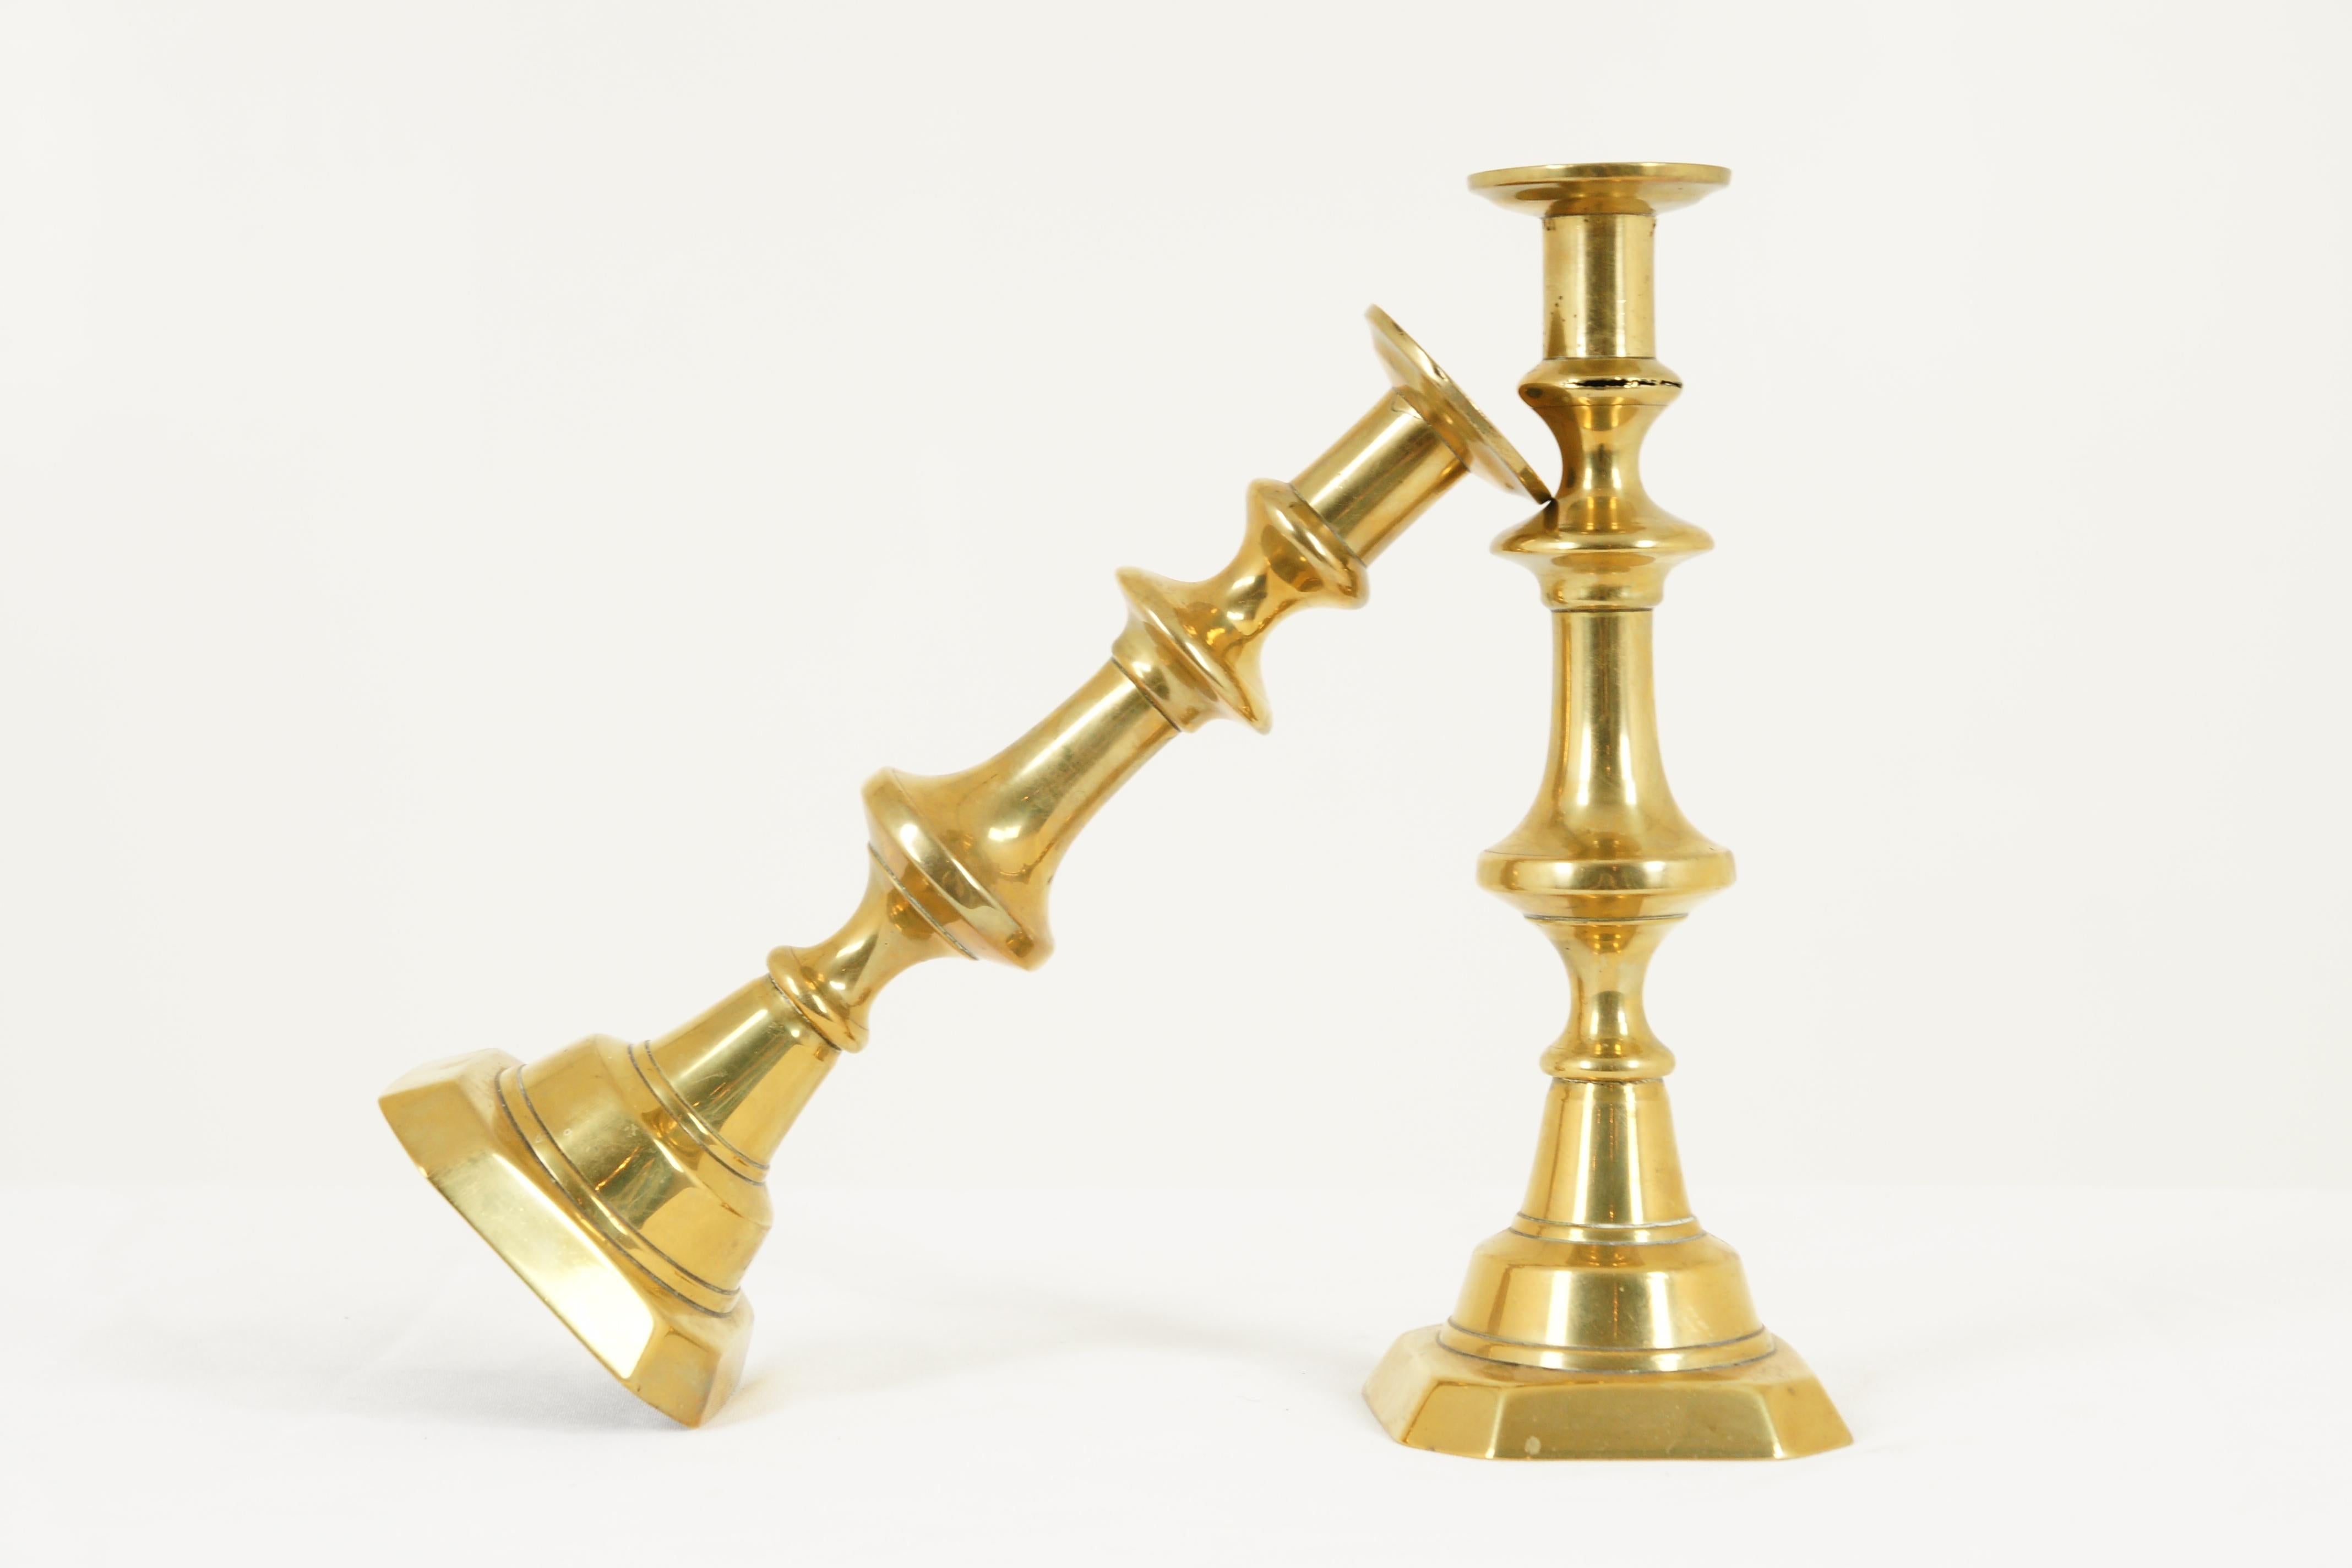 Brass Candlesticks, Brass Candle Holders, Victorian, Scotland 1880, B1652

Scotland 1880
Solid brass in very good condition
Shaped column rising from a shaped stepped base
Both sit flush to the tabletop, no wiggles
All original
Still has its